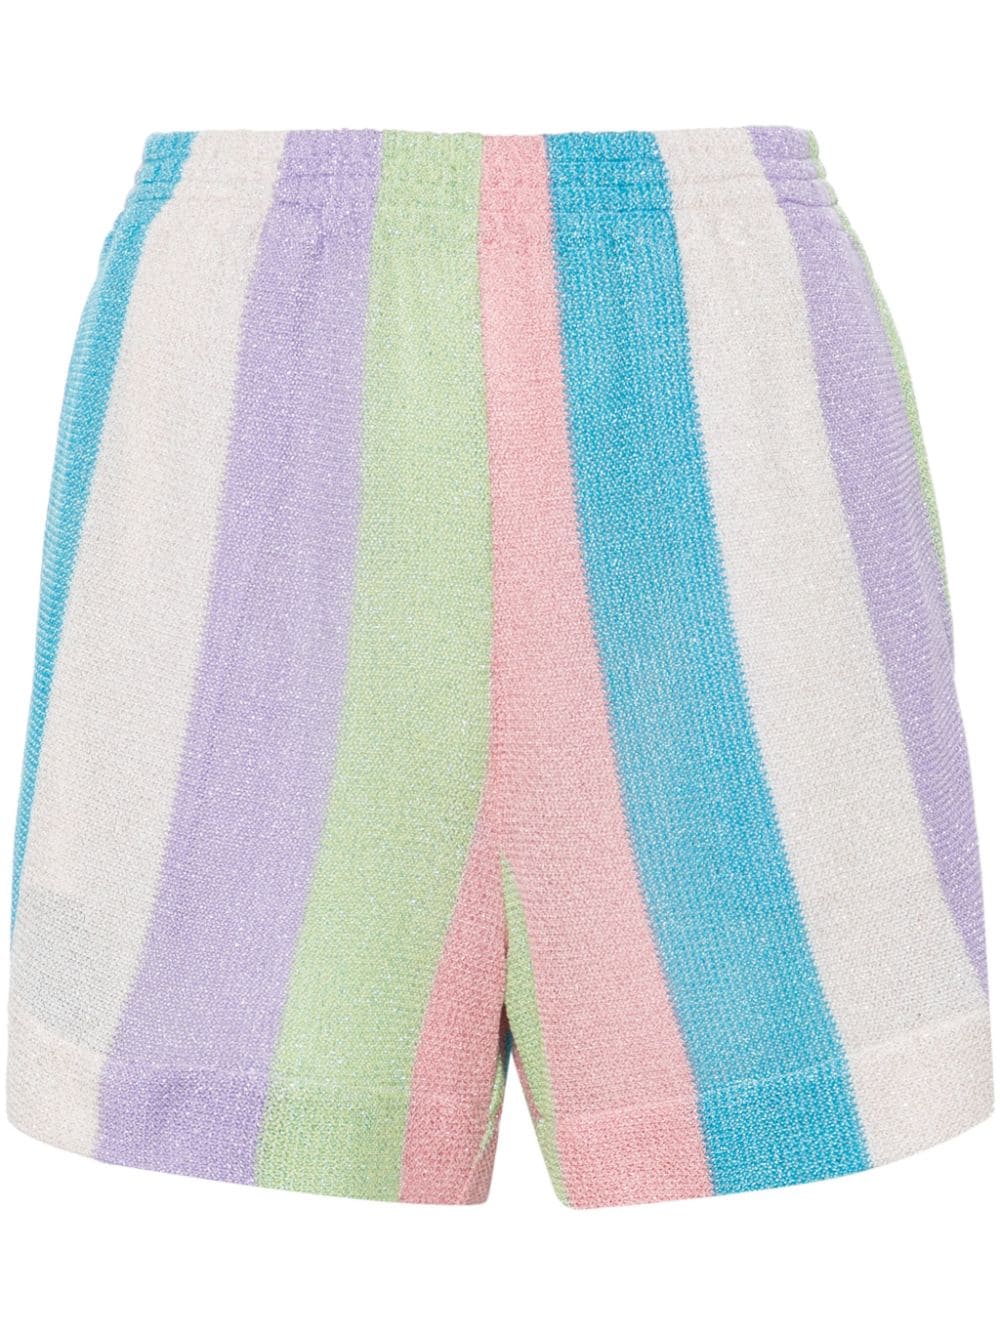 Meave striped knitted shorts